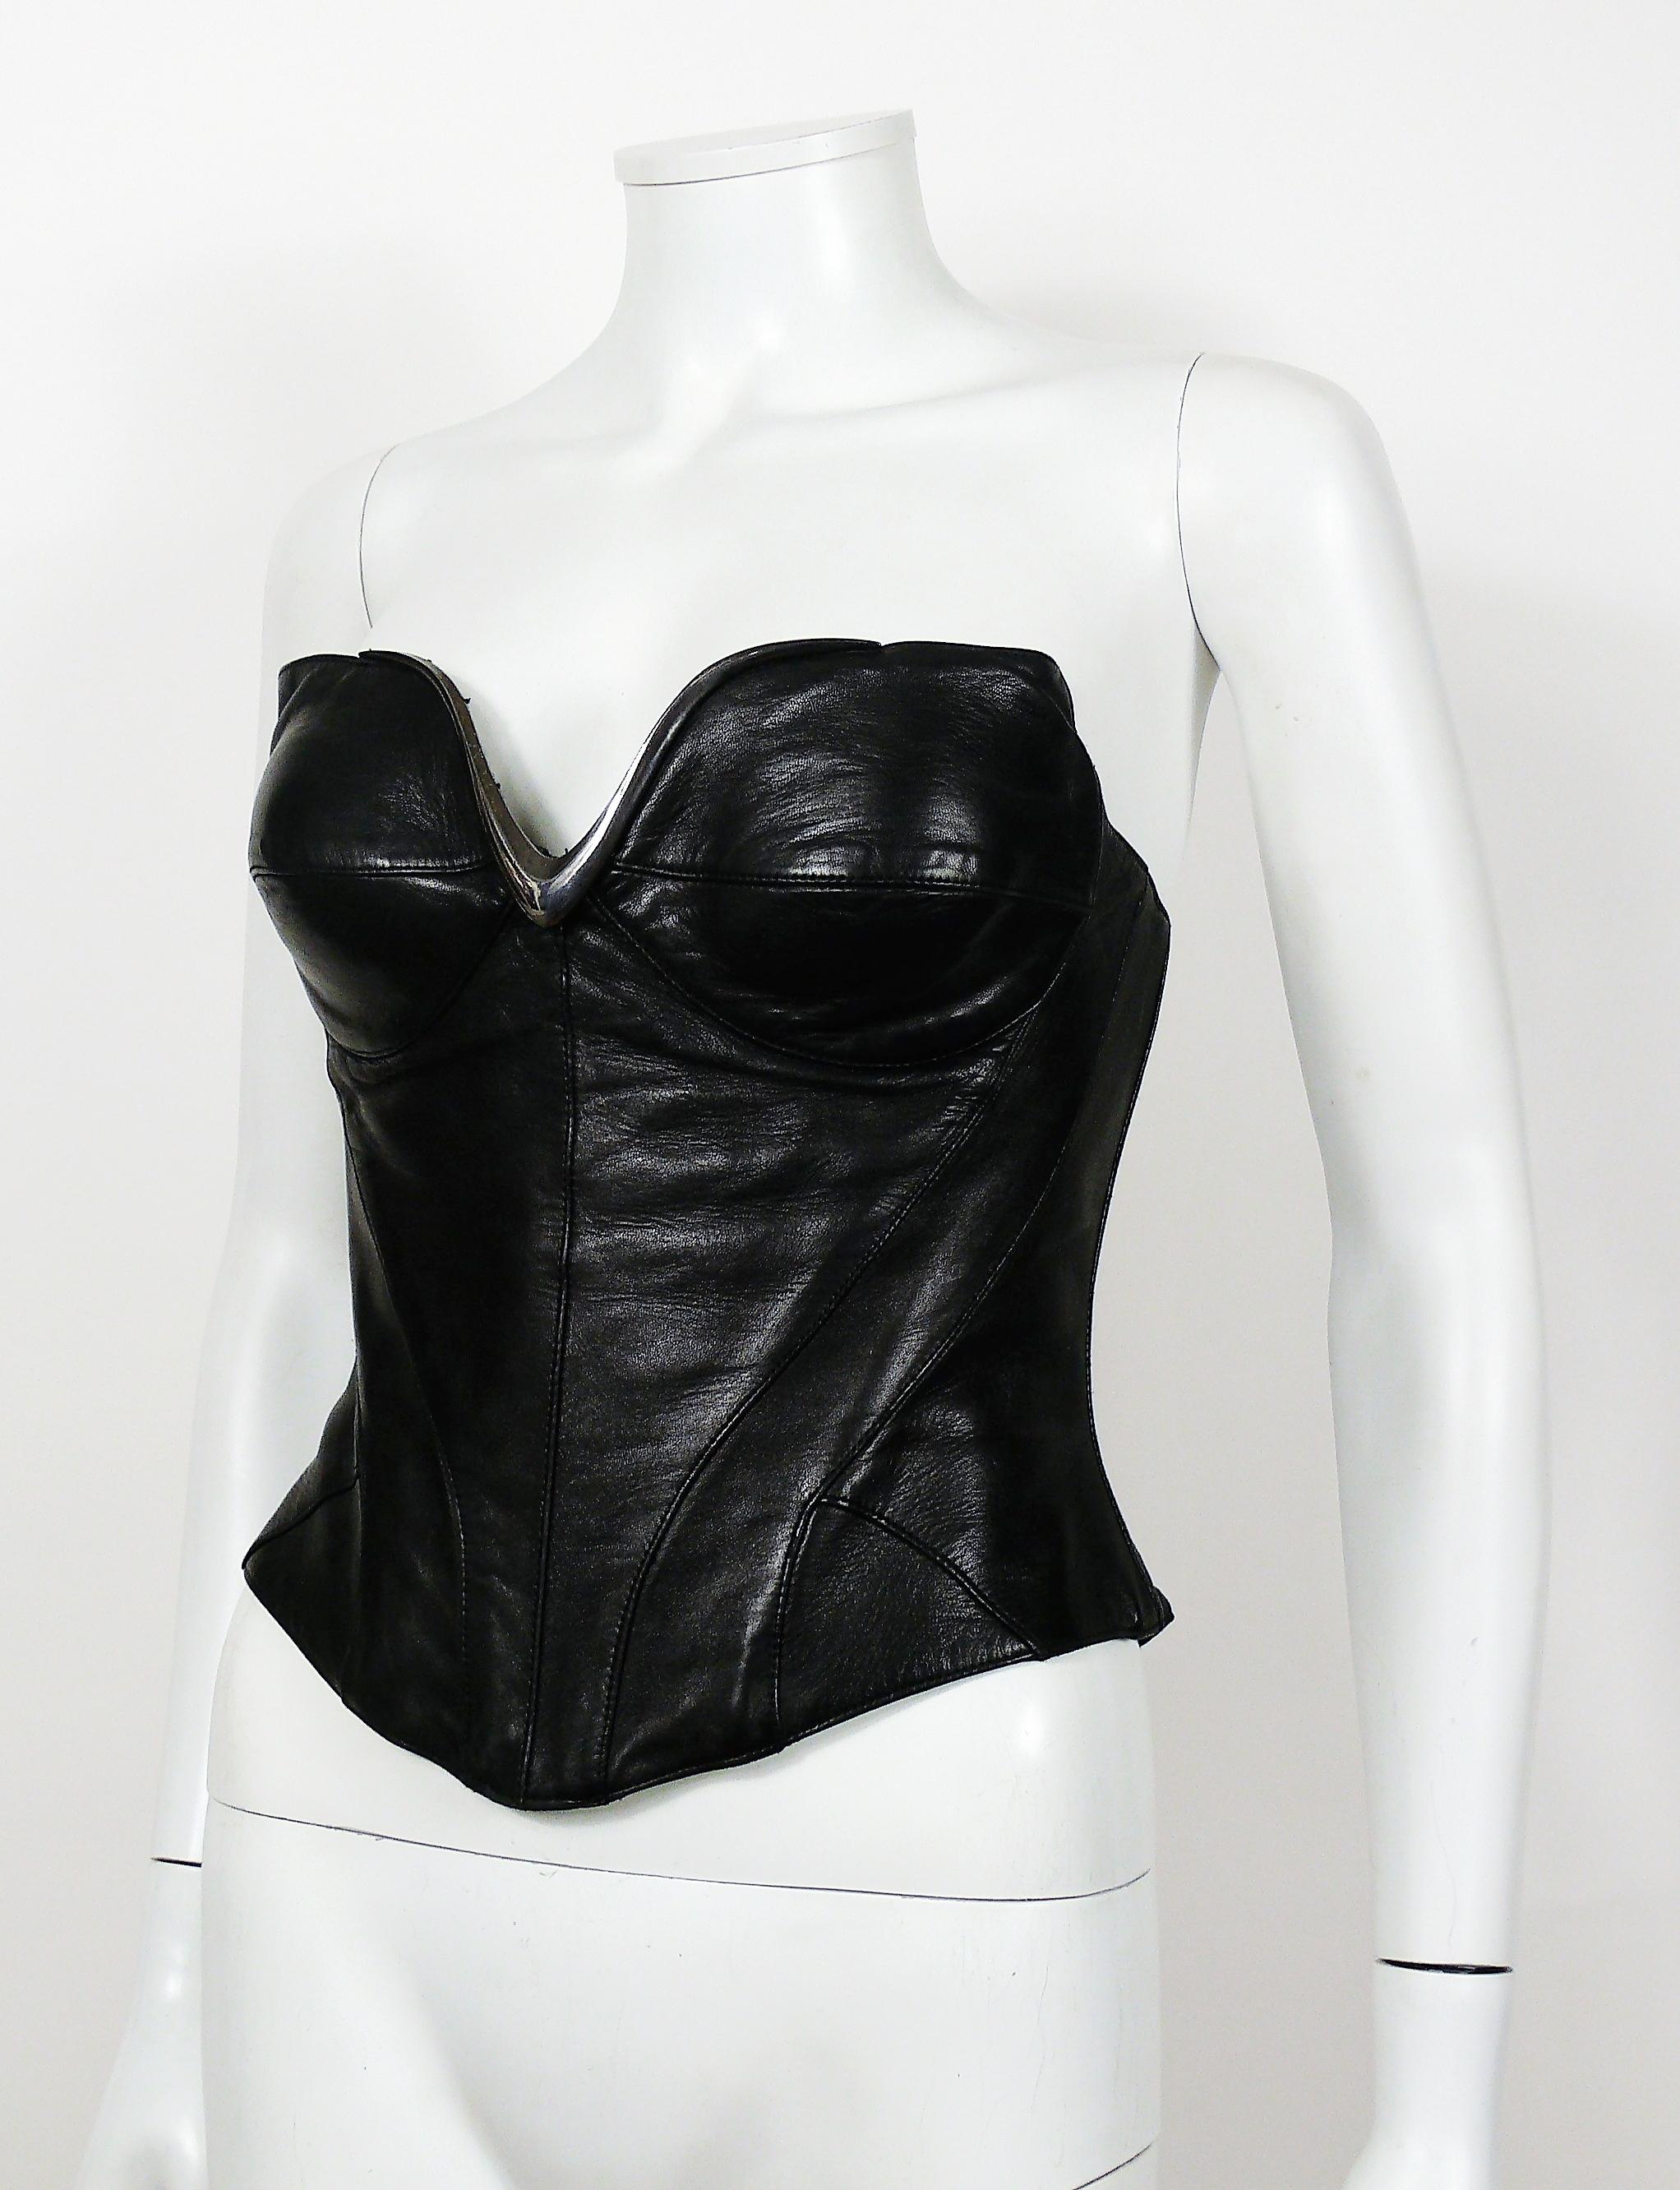 Thierry Mugler Couture Iconic Vintage Black Leather Bustier Corset at  1stDibs | thierry mugler corset, mugler corset, mugler corsets